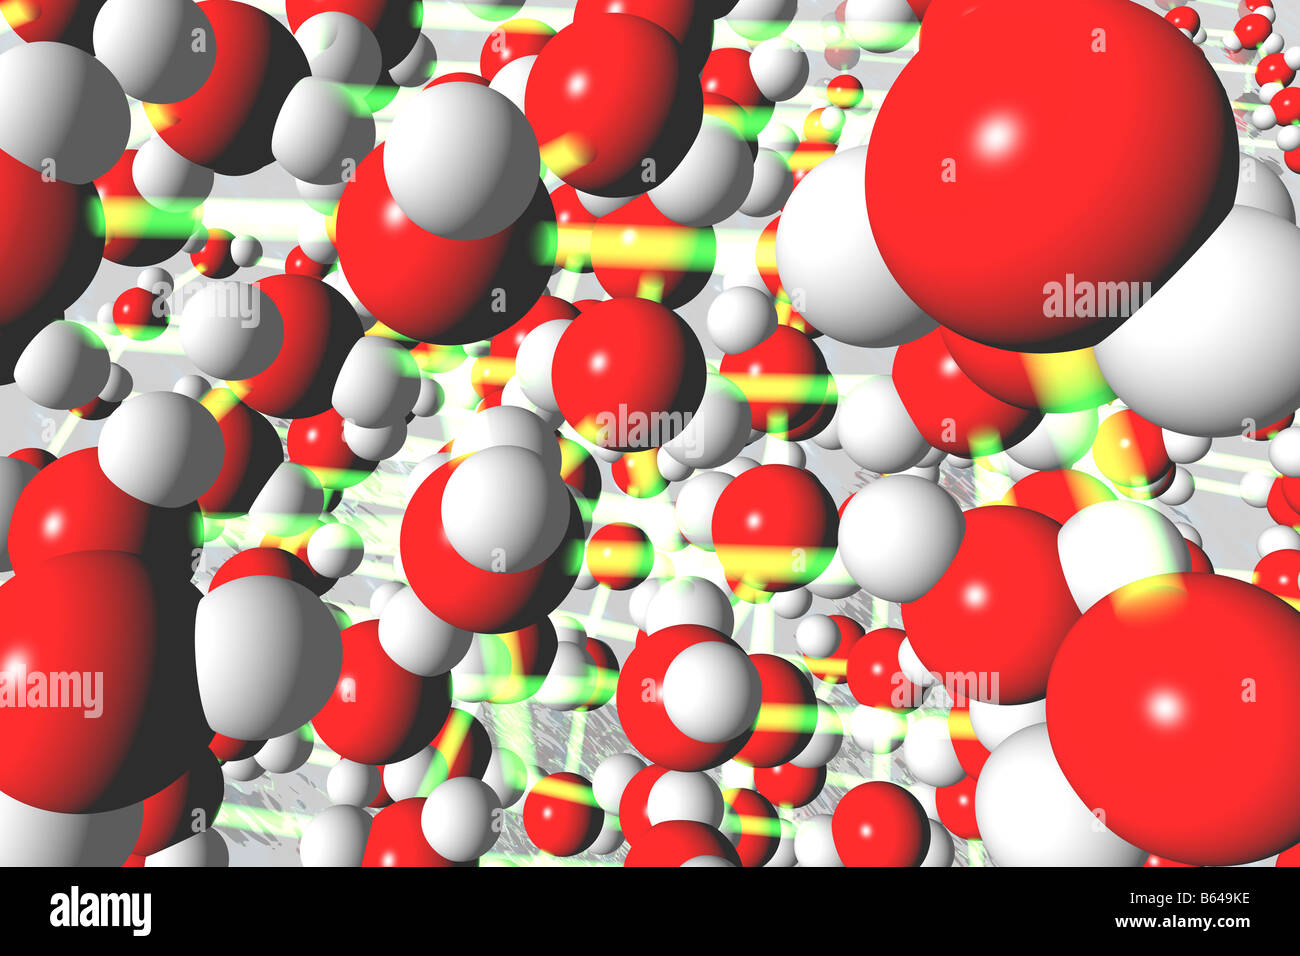 Concept of water molecules in ice. Stock Photo